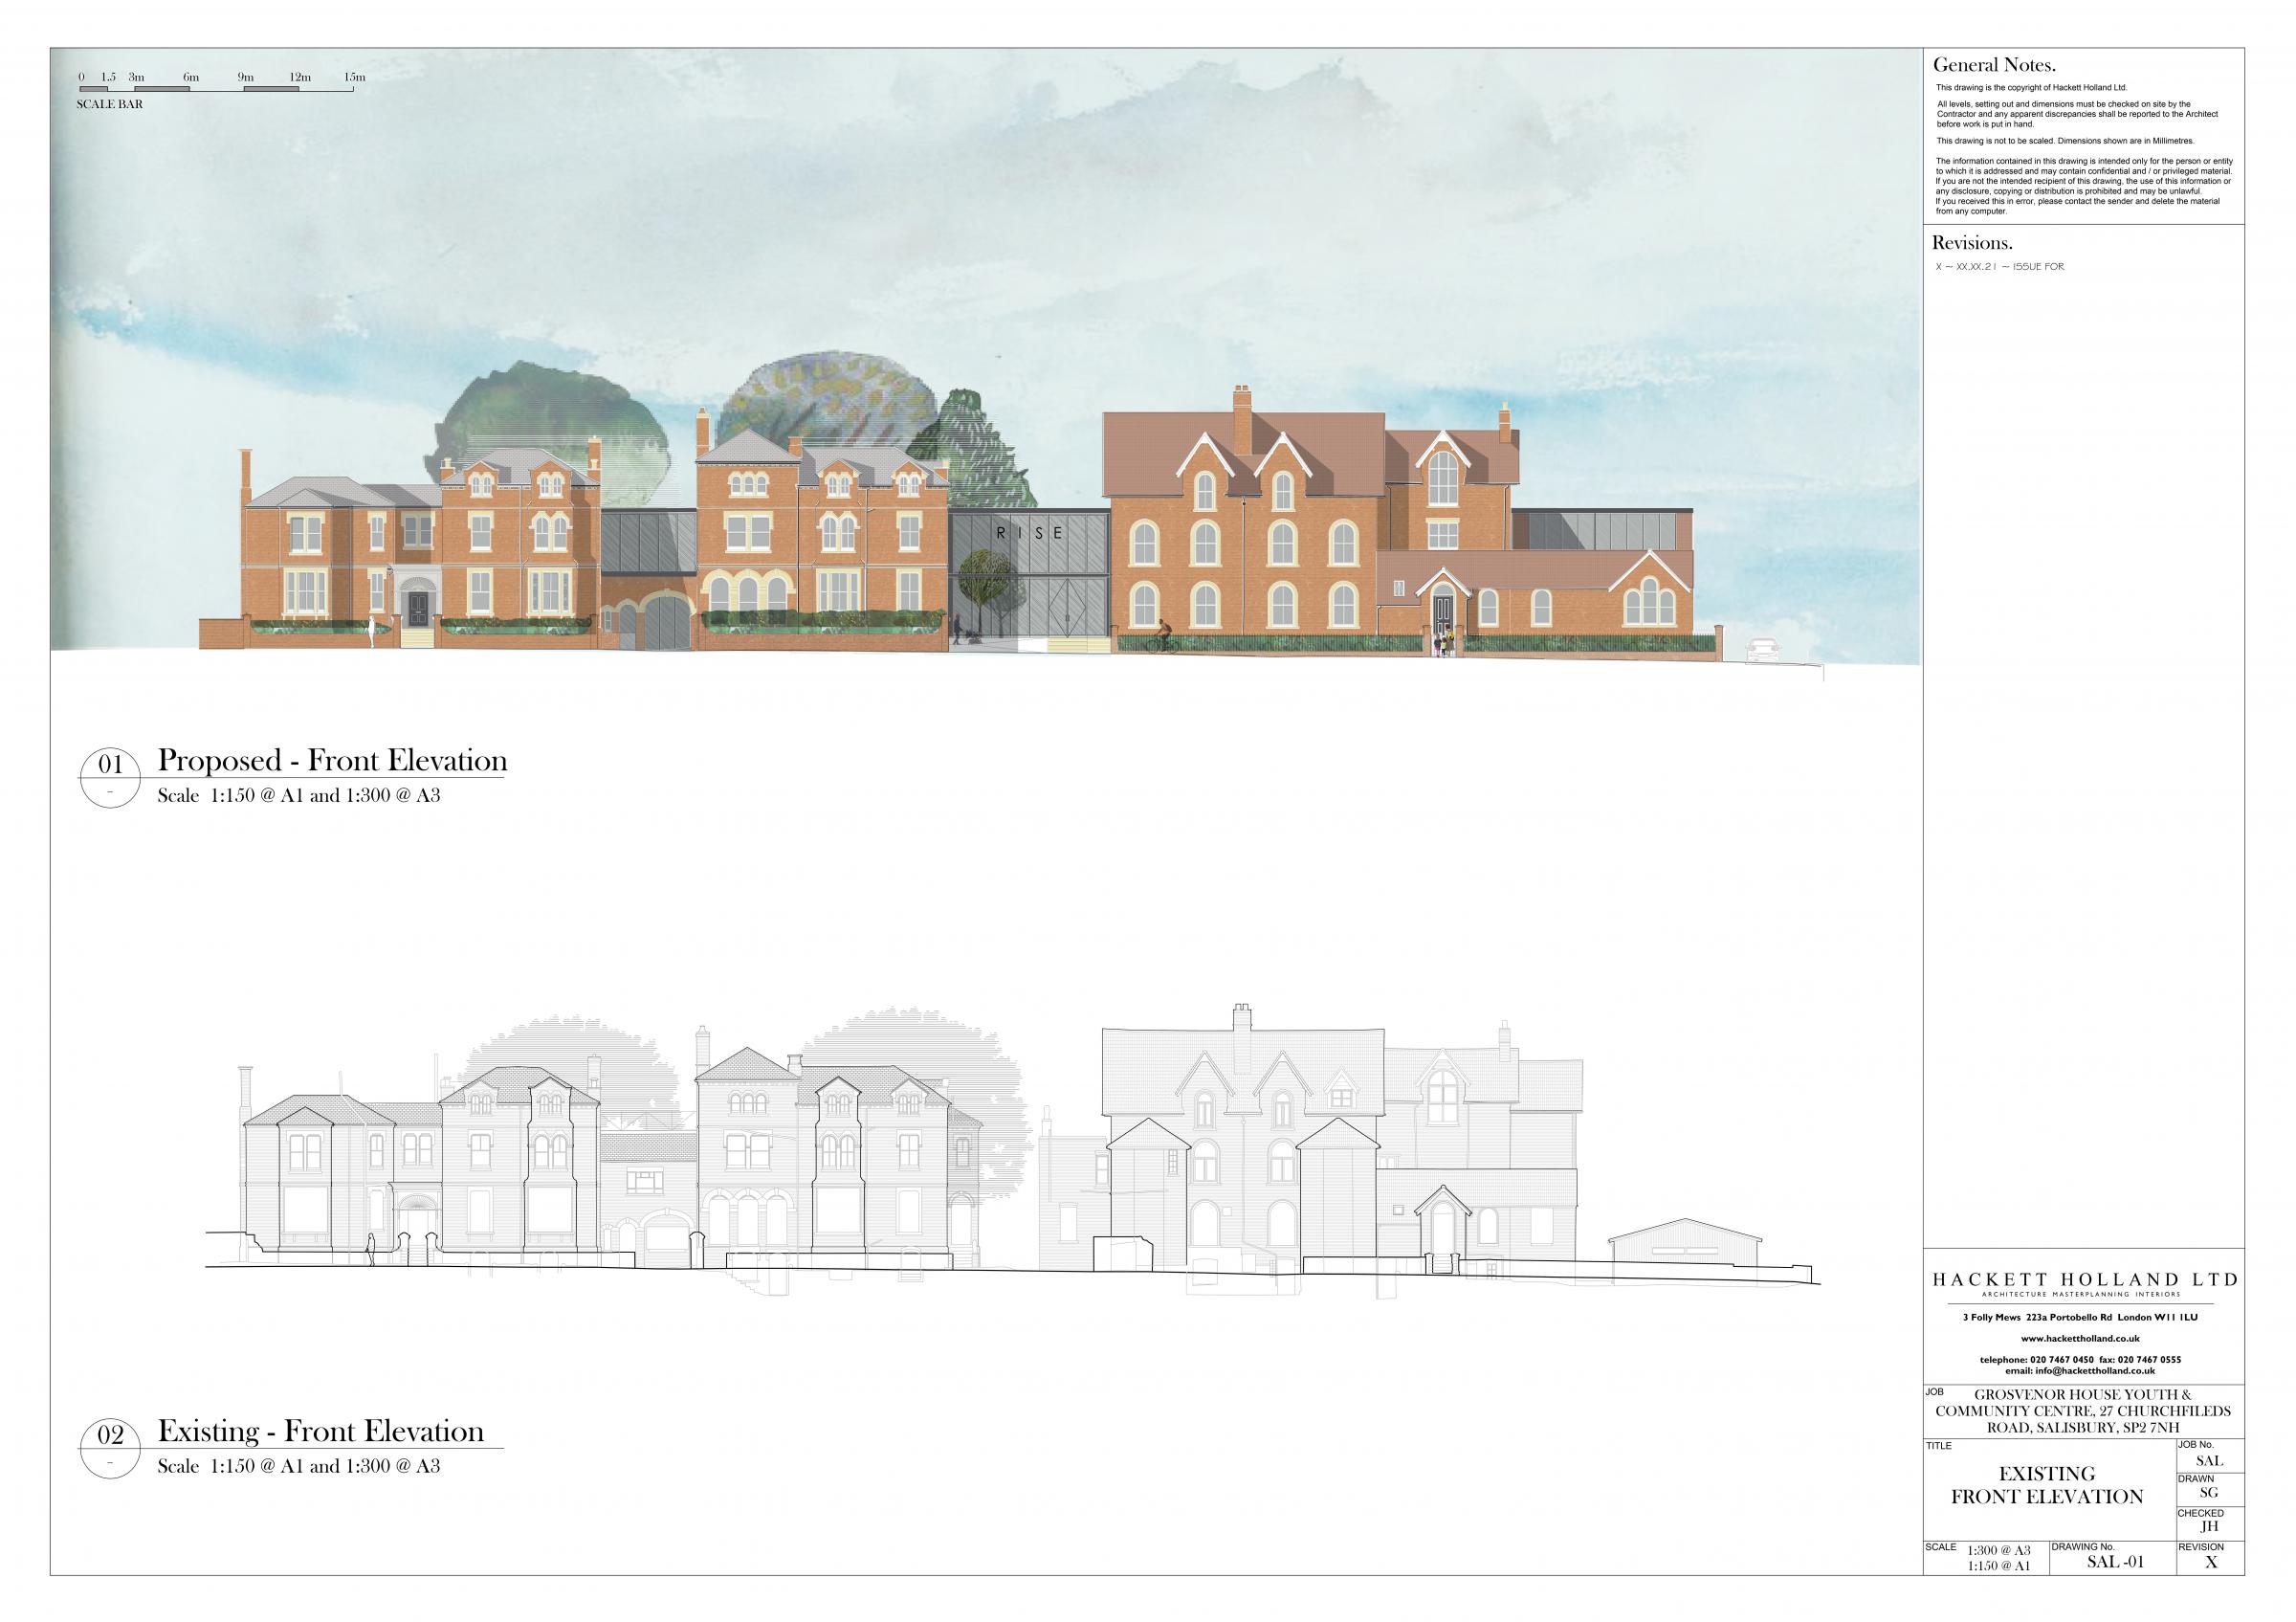 Architects impression of the front elevation. Picture from Hackett Holland.